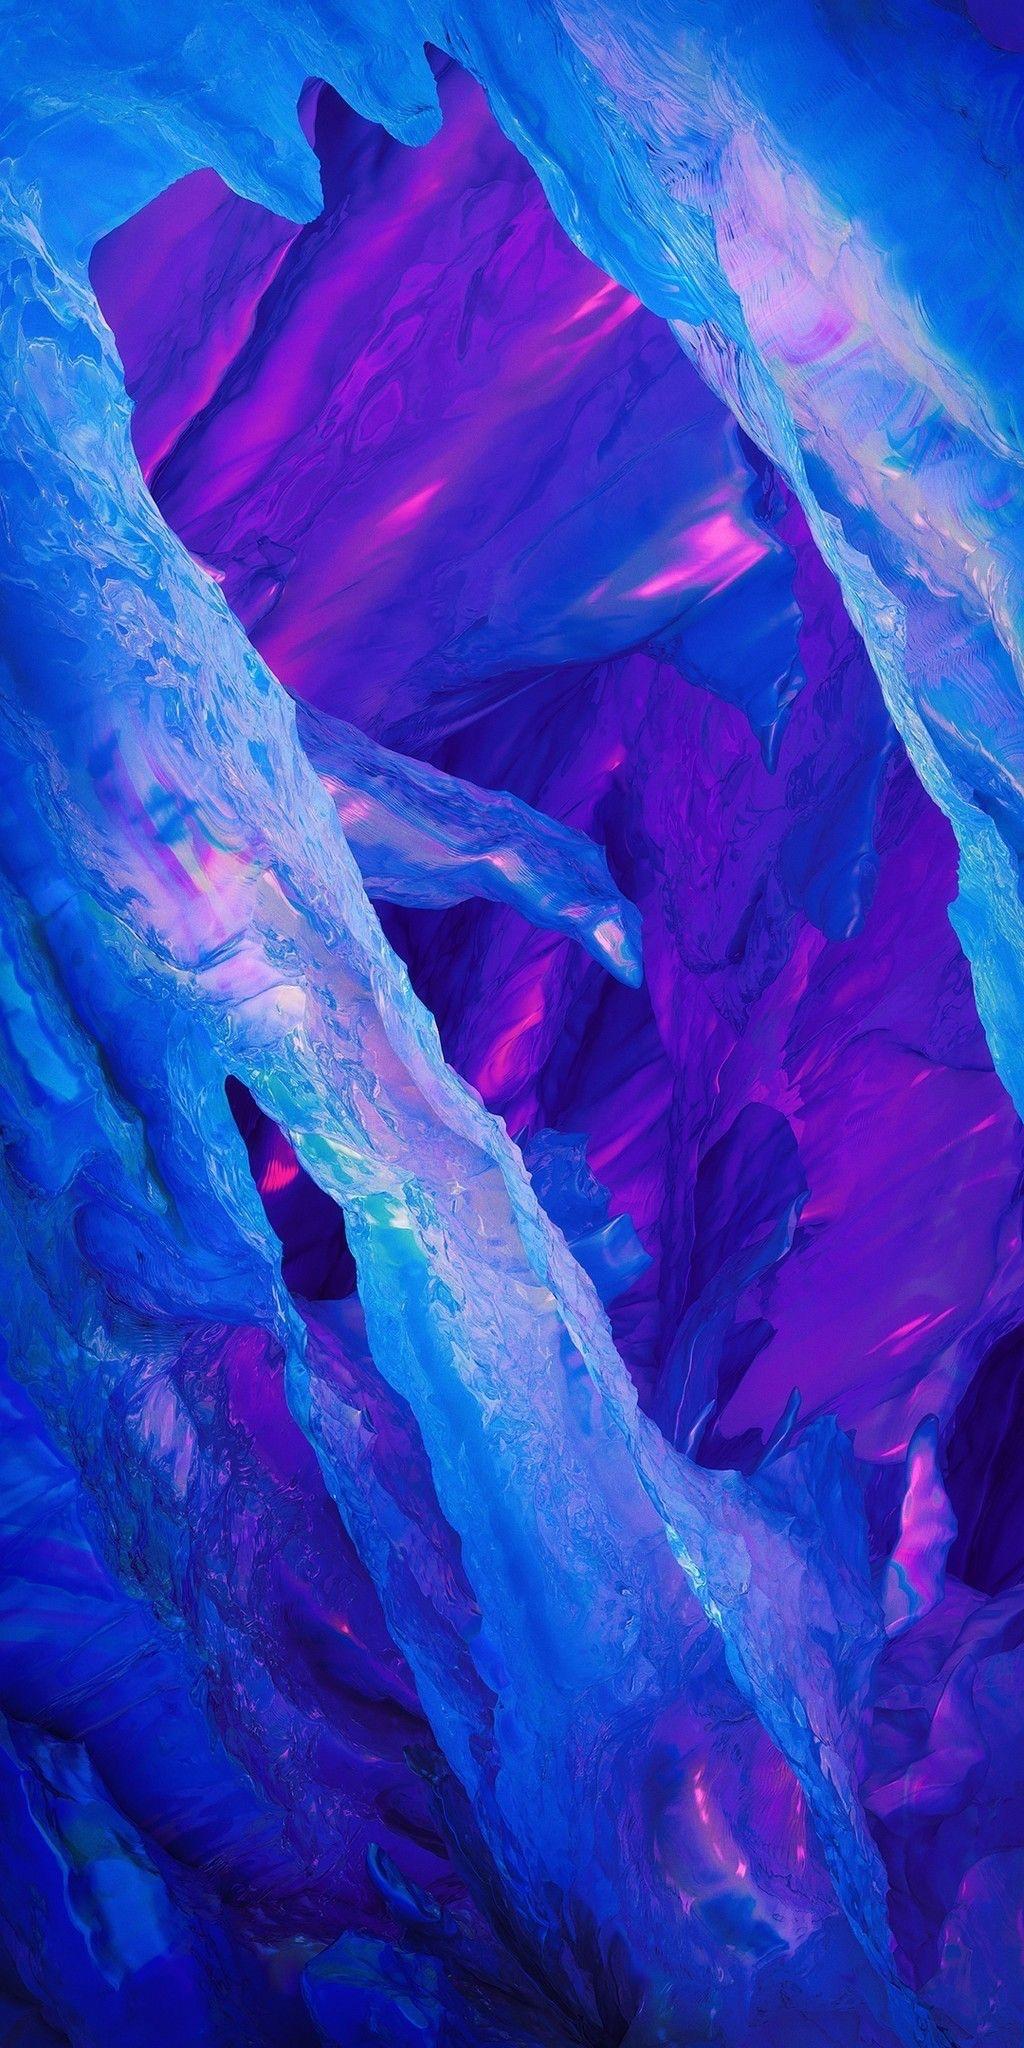 Cotton candy crystals. iPhone X Wallpaper X Wallpaper HD